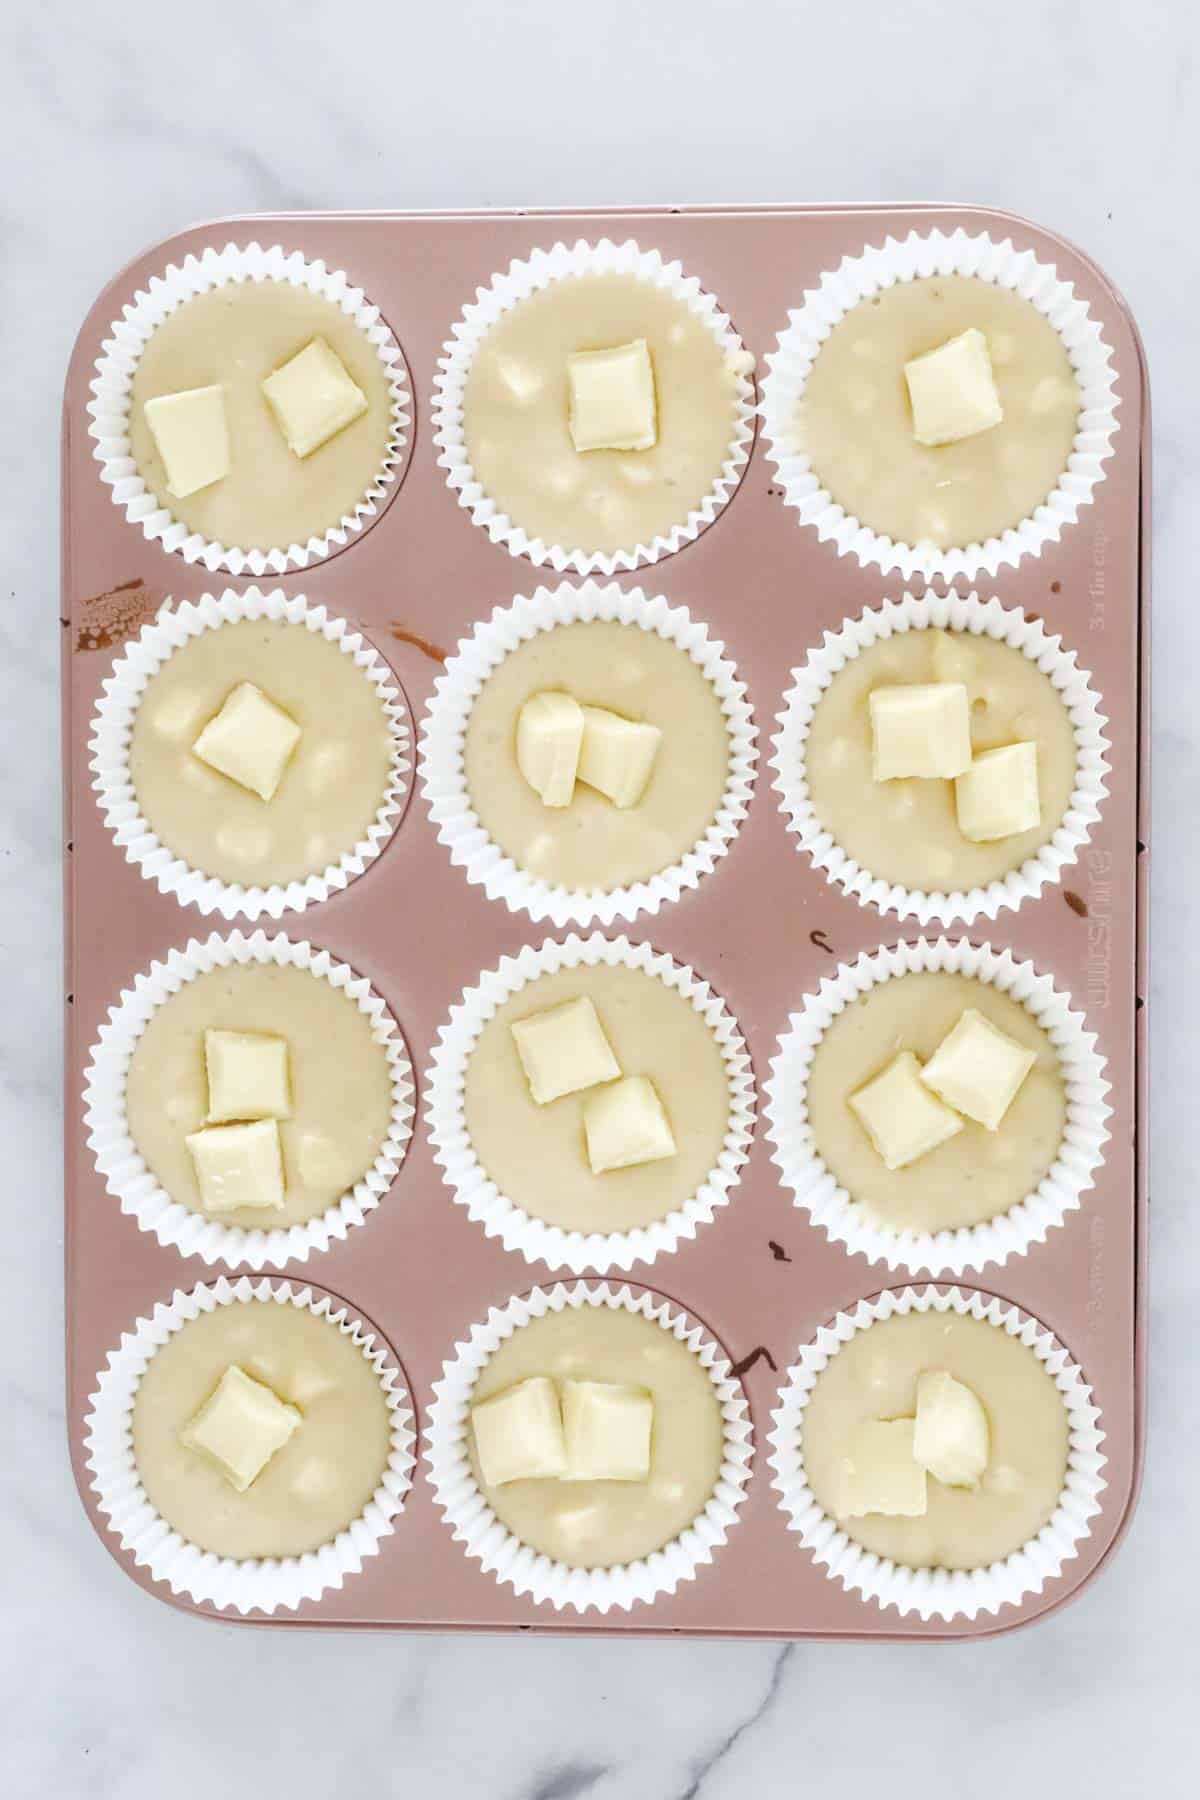 Chunks of white chocolate on top of muffin batter.